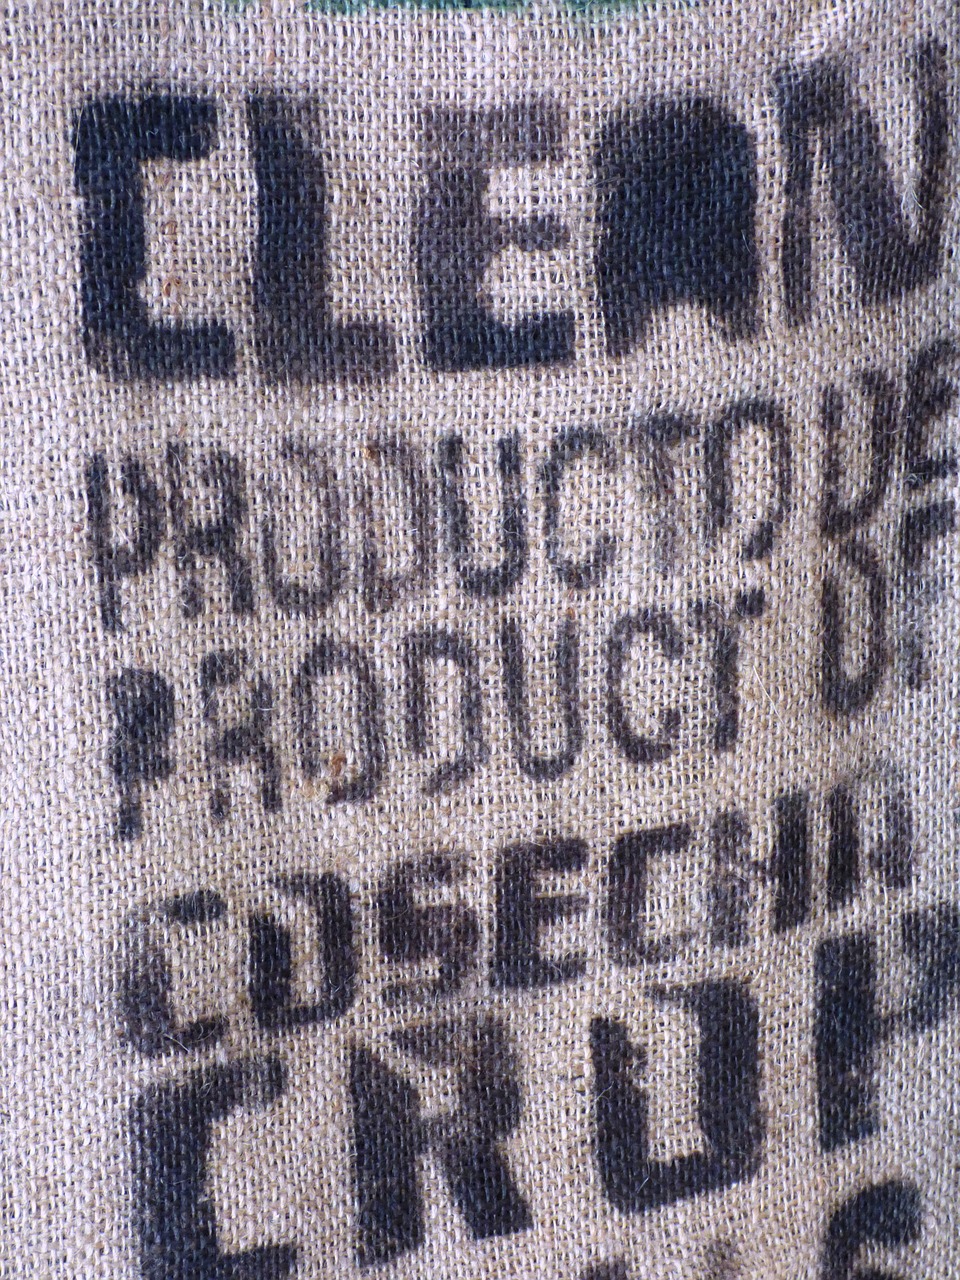 flax linen bag material free photo